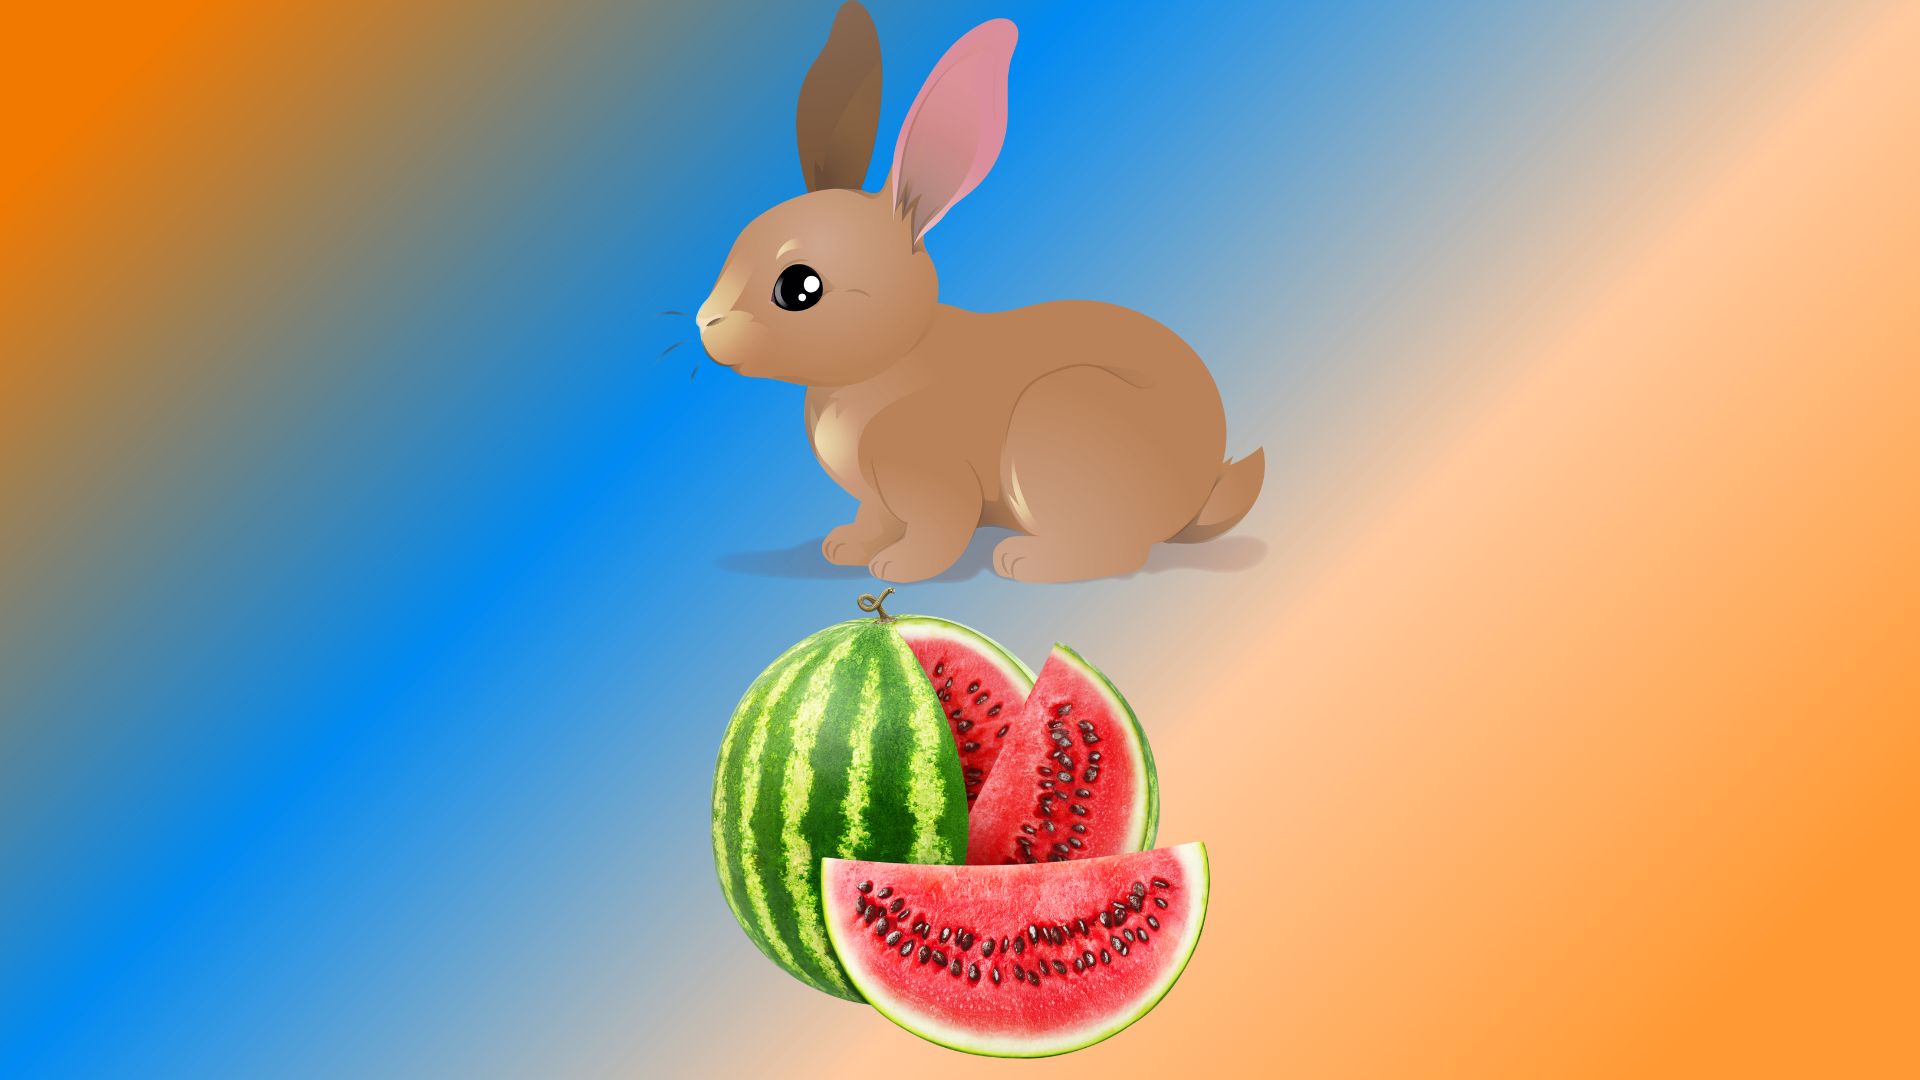 Can Rabbits Eat Watermelons